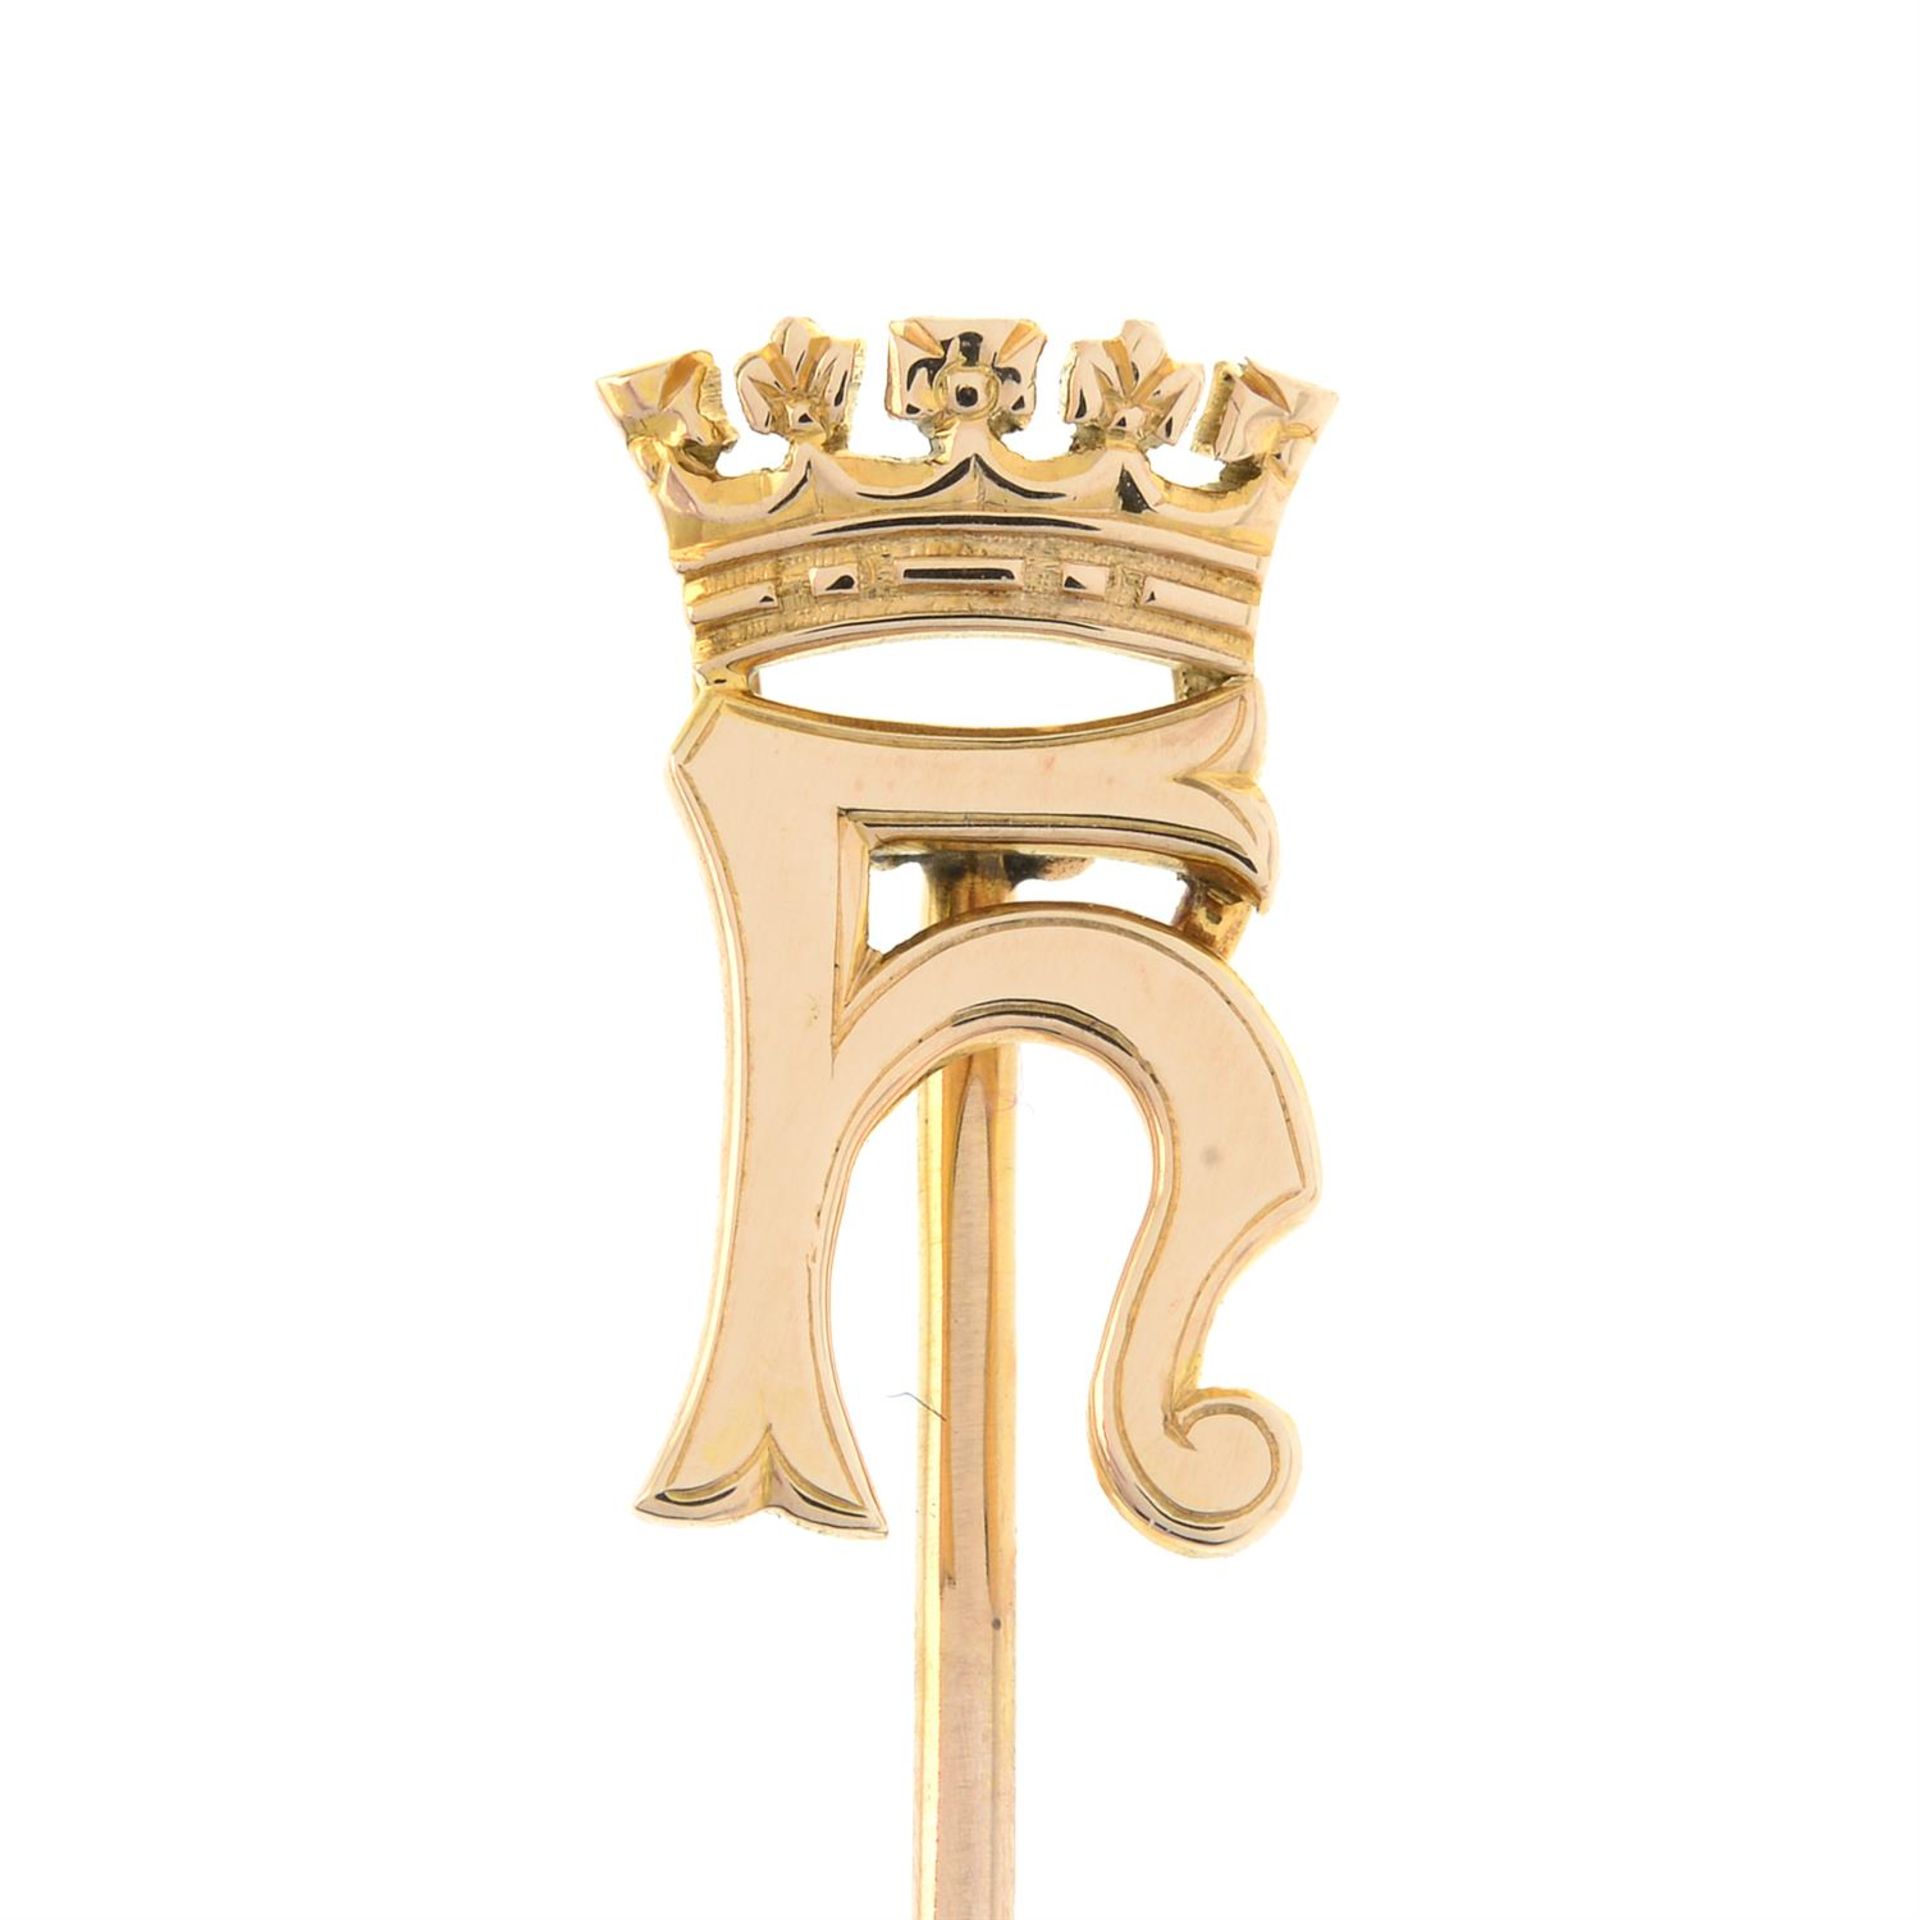 An early 20th century 15ct gold monogram stickpin for Princess Helen of Waldeck and Pyrmont, - Image 3 of 7